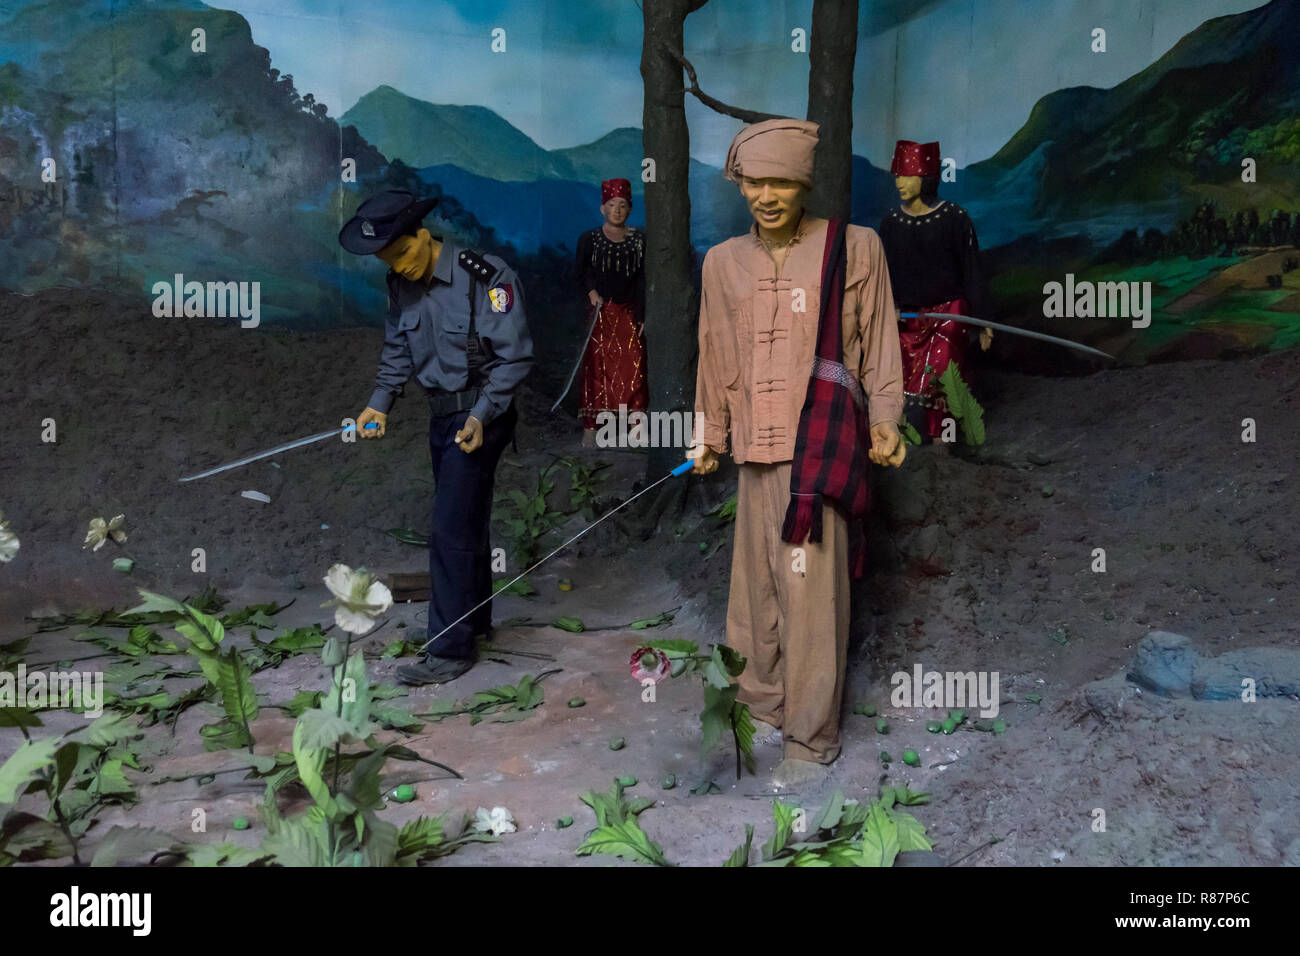 Diorama showing poppy destruction at the Drug Elimination Museum in Yangon, Myanmar. Stock Photo